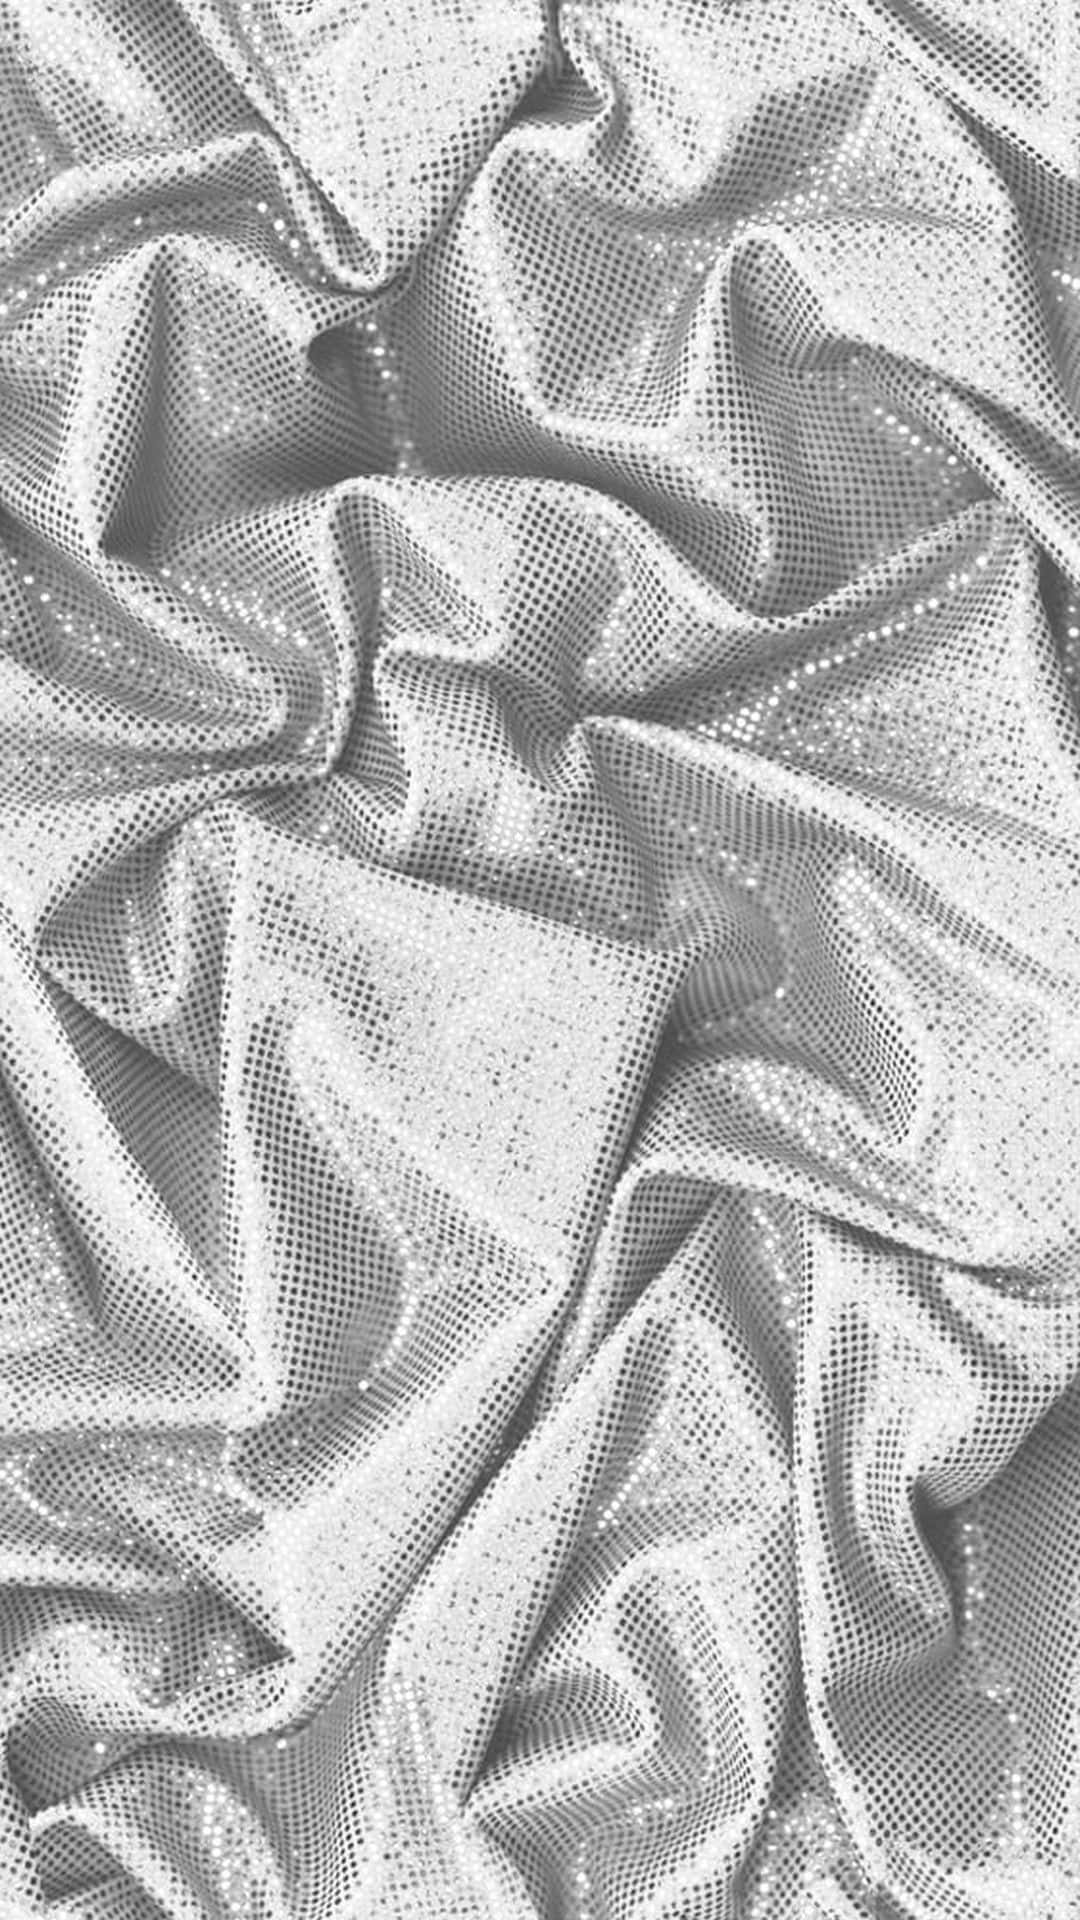 A white and silver metallic fabric - Silver